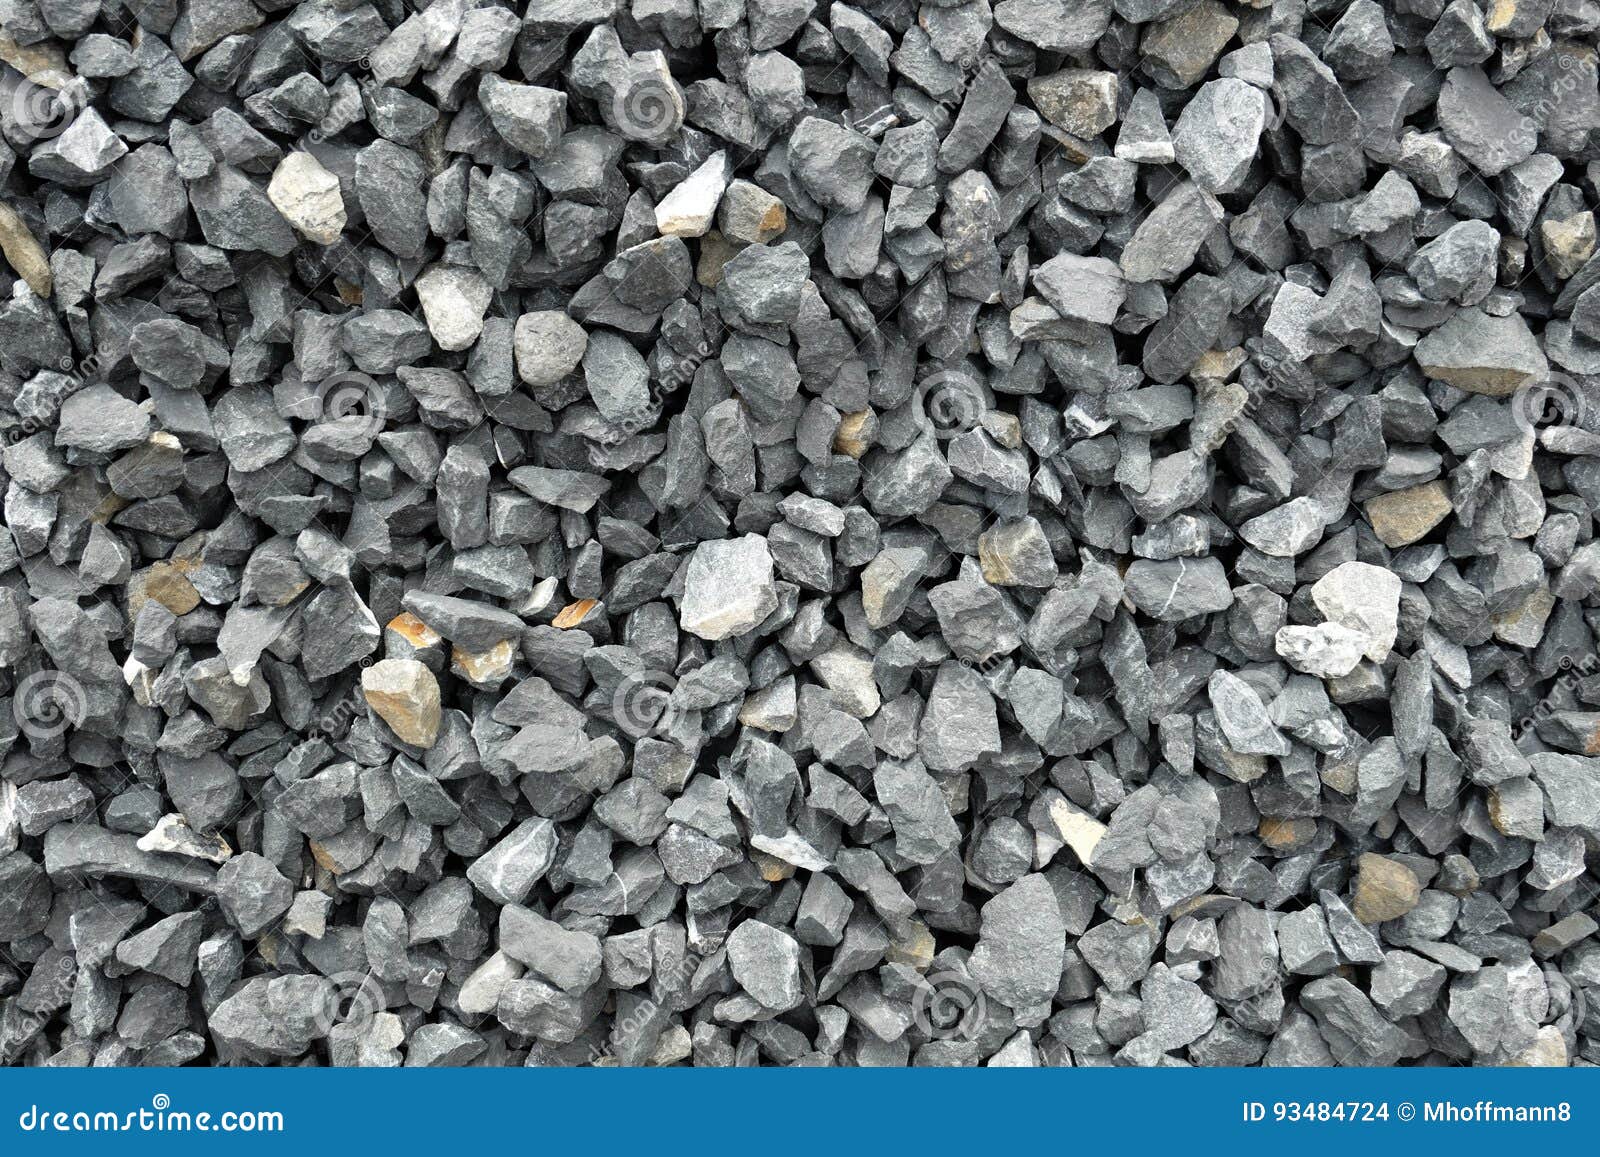 aggregate of coarse gray stones, crushed at a stone pit, gravel pattern